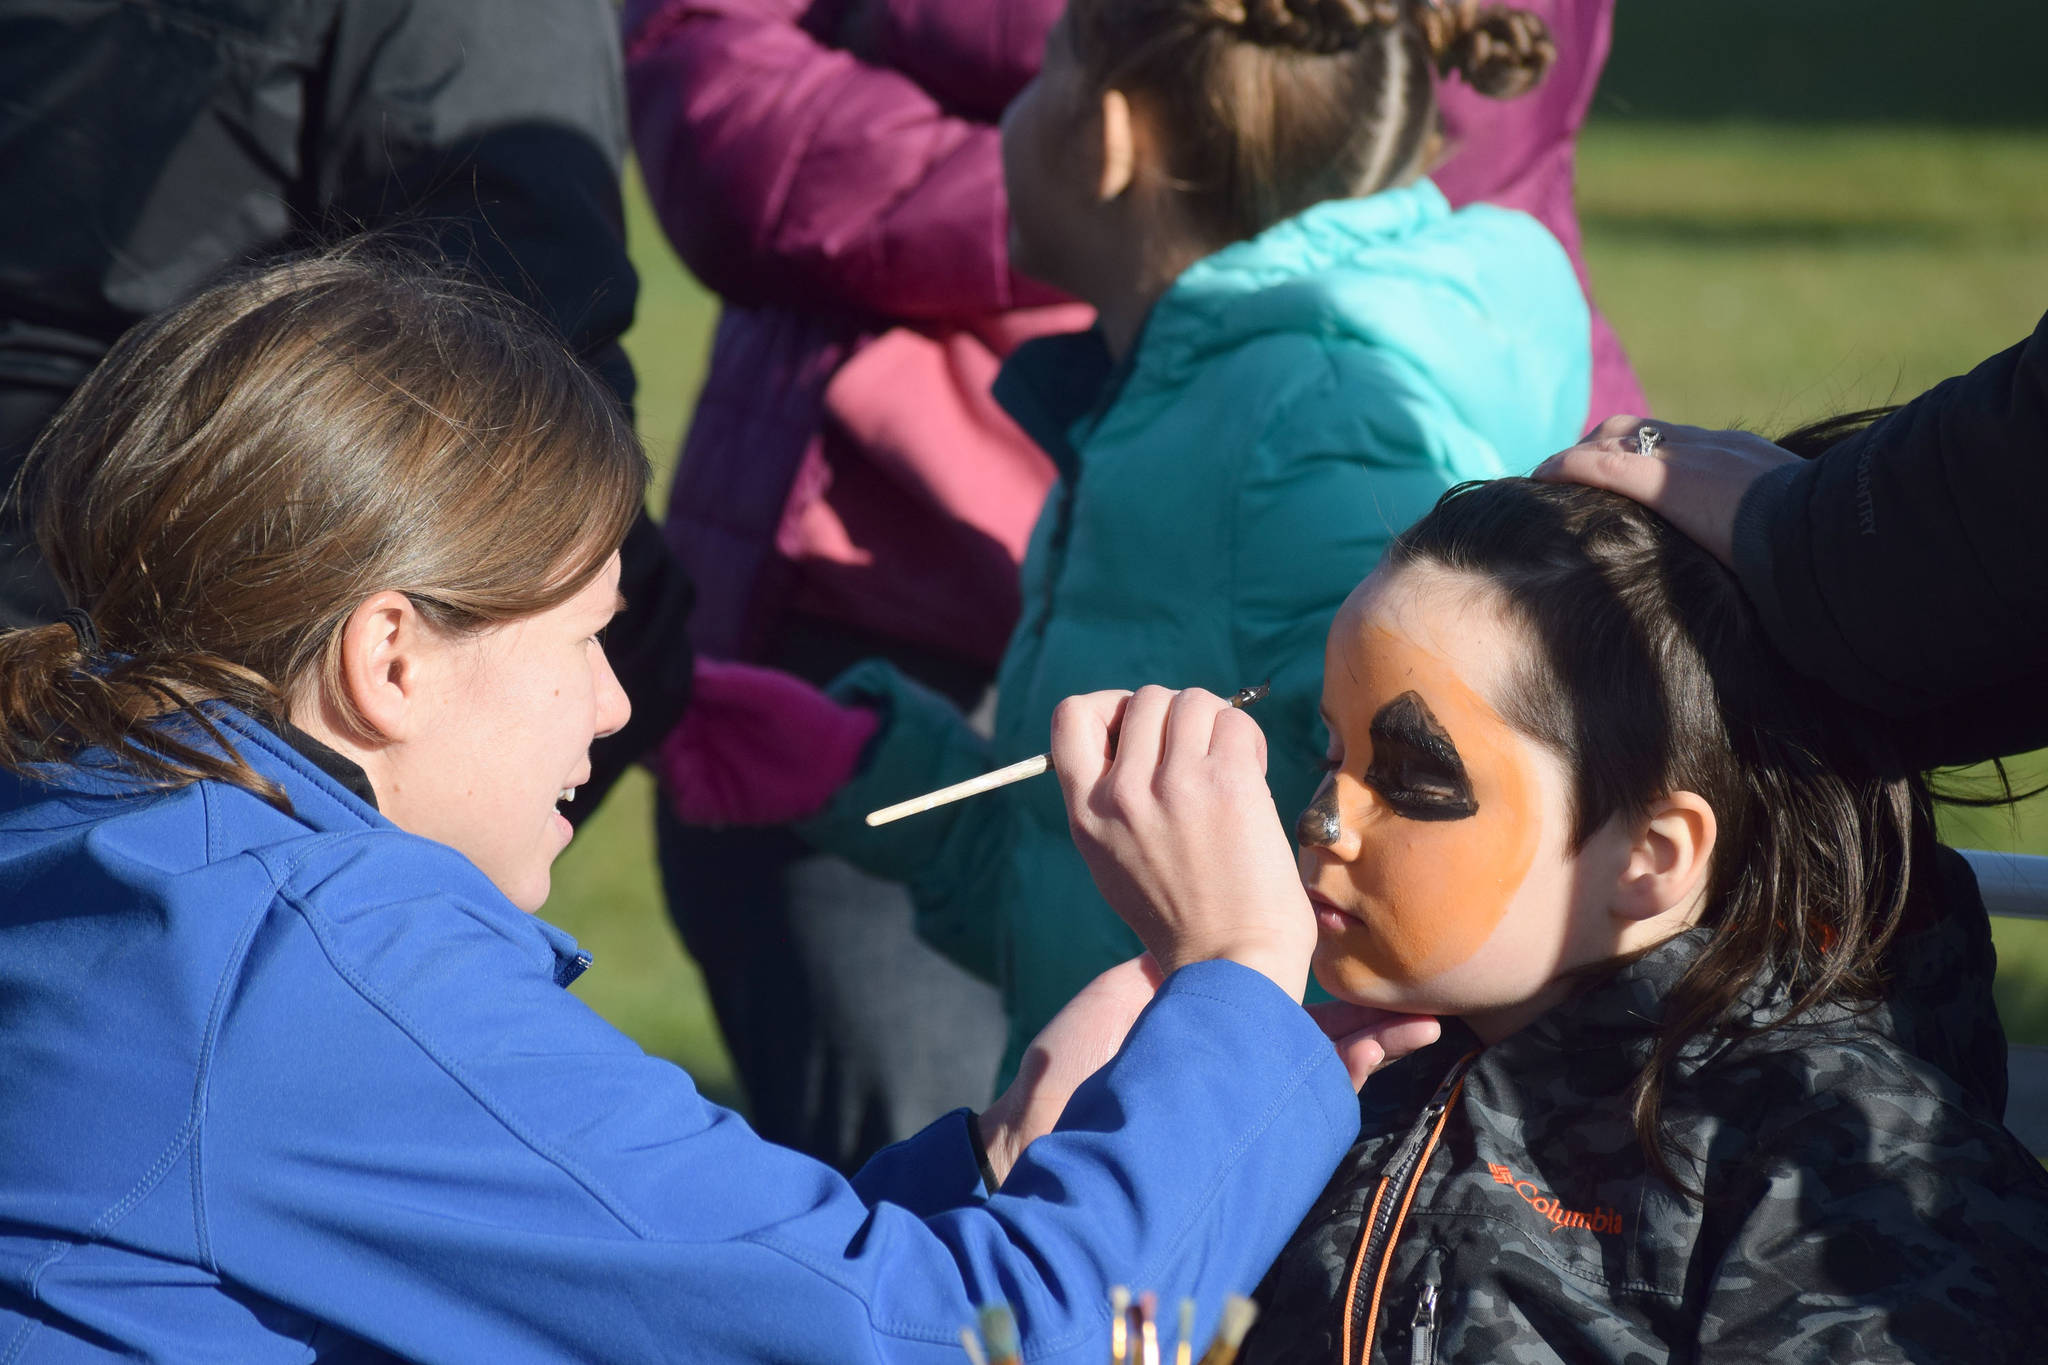 Children get their face painted Saturday, Oct. 12, 2019, at the fourth annual Fall Pumpkin Festival at Millenium Square in Kenai, Alaska. (Photo by Joey Klecka/Peninsula Clarion)